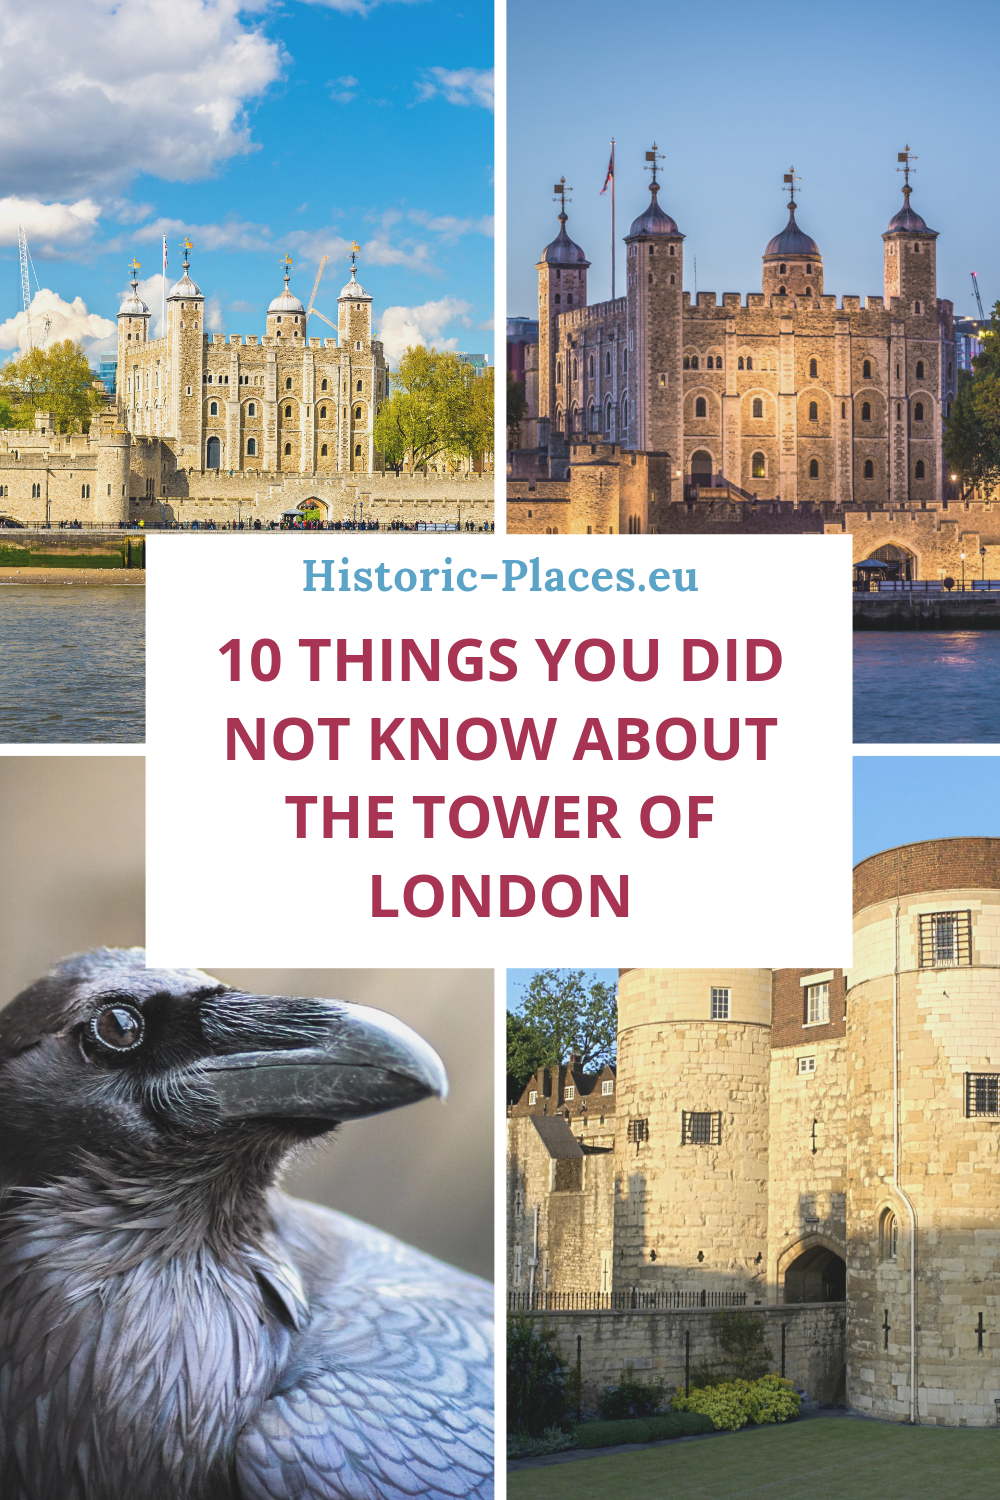 10 things you did not know about the Tower of London